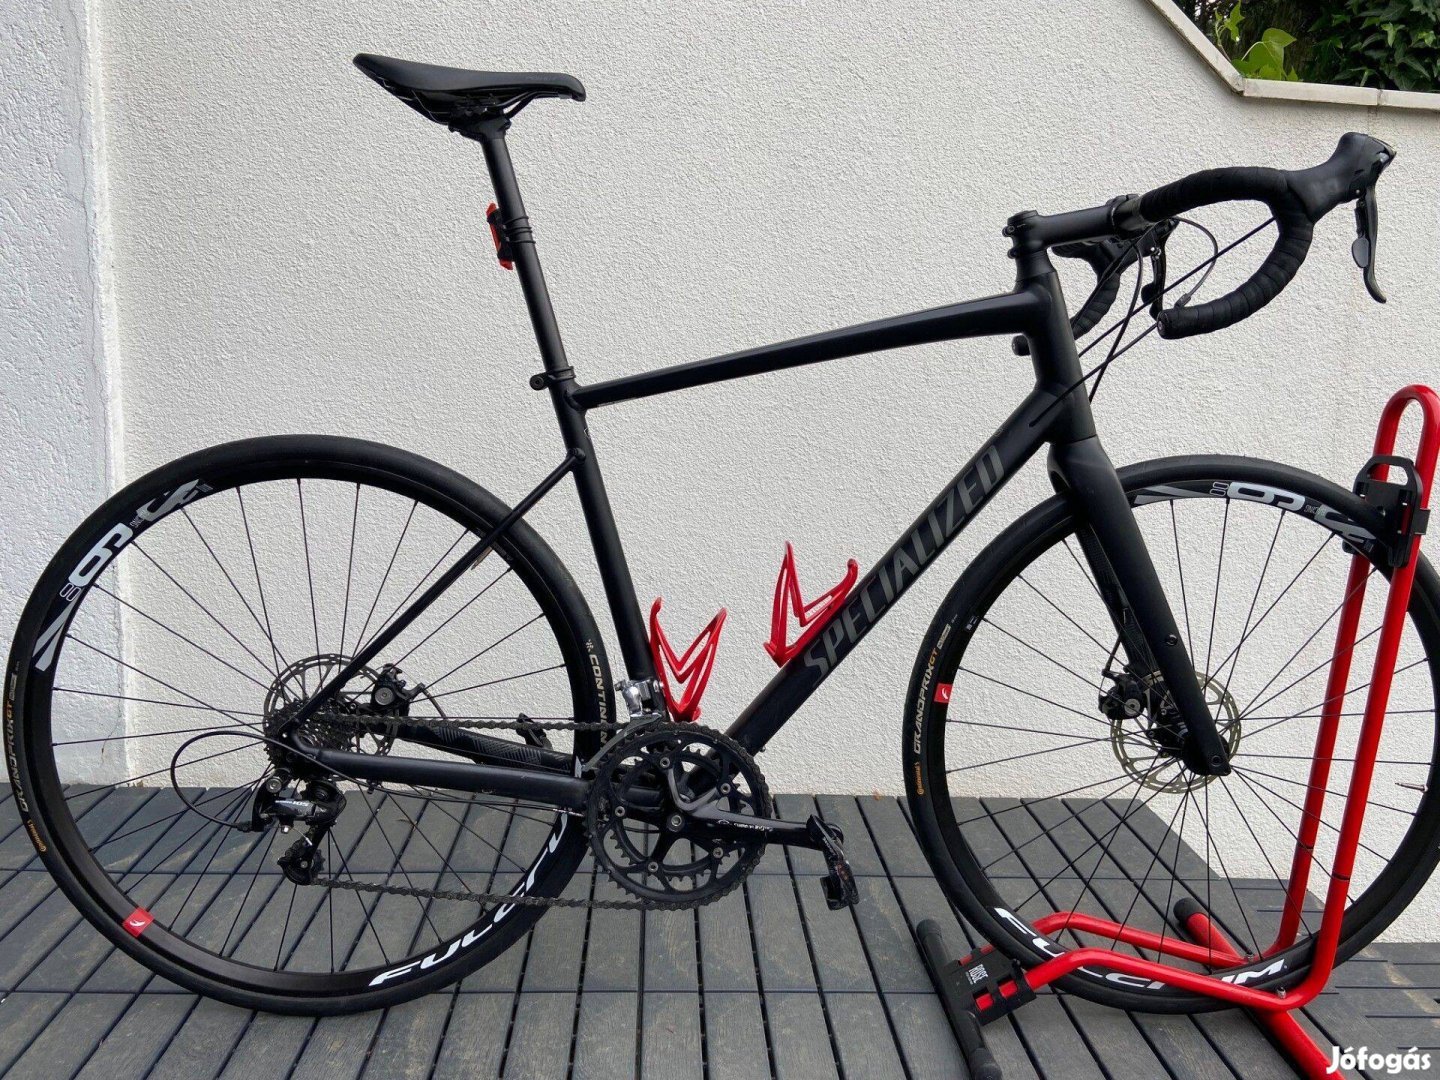 Specialized Diverge 58